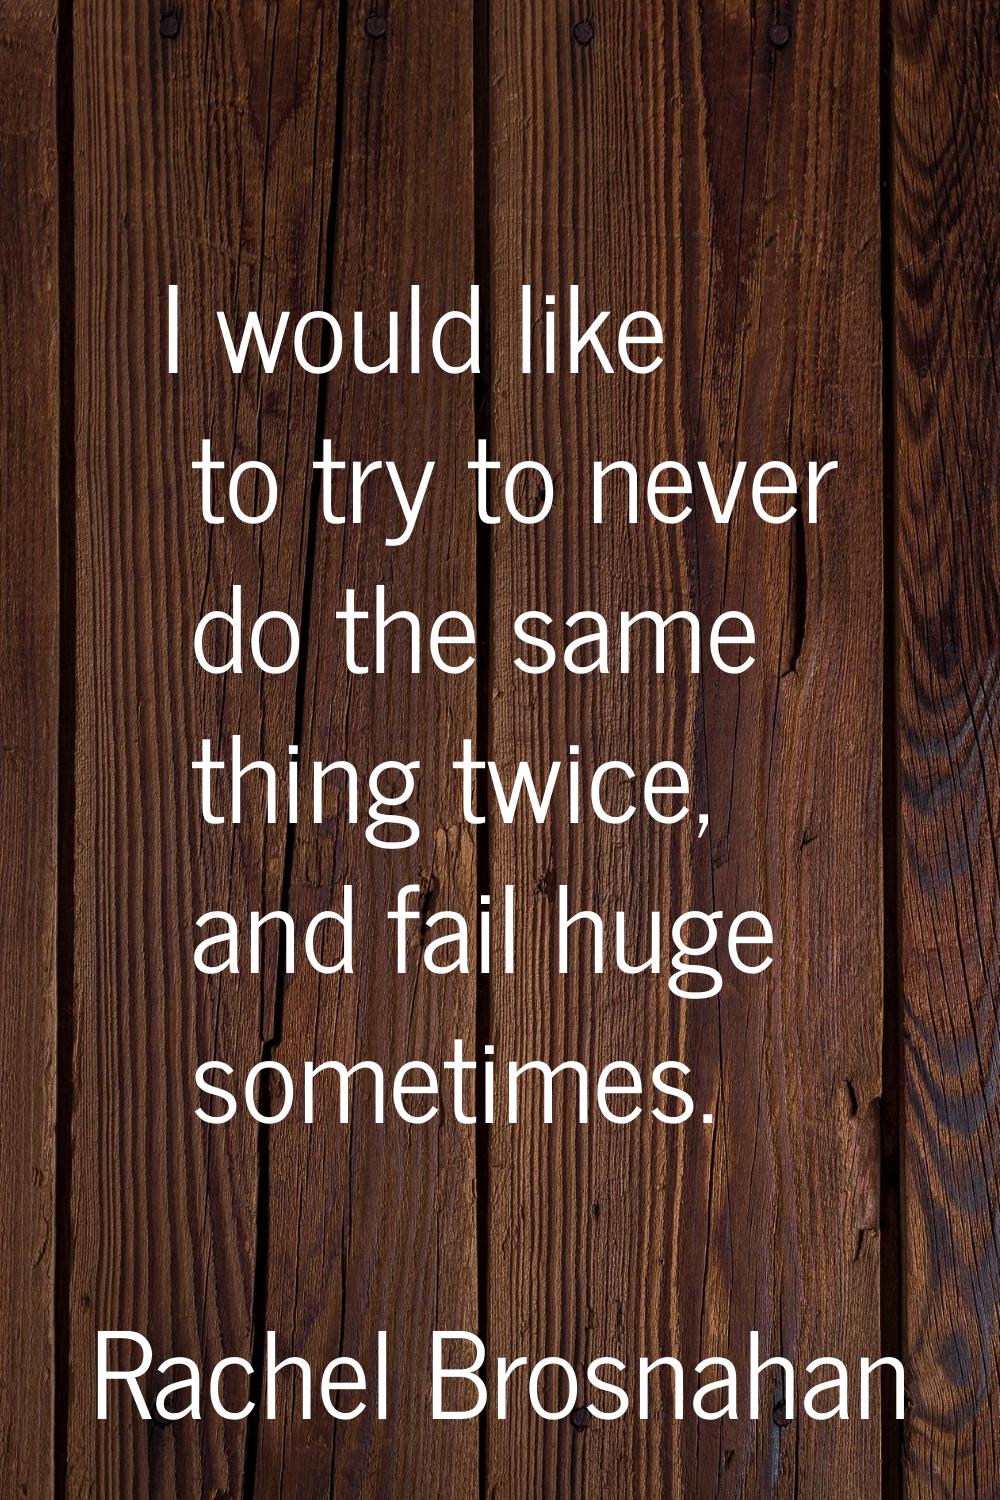 I would like to try to never do the same thing twice, and fail huge sometimes.